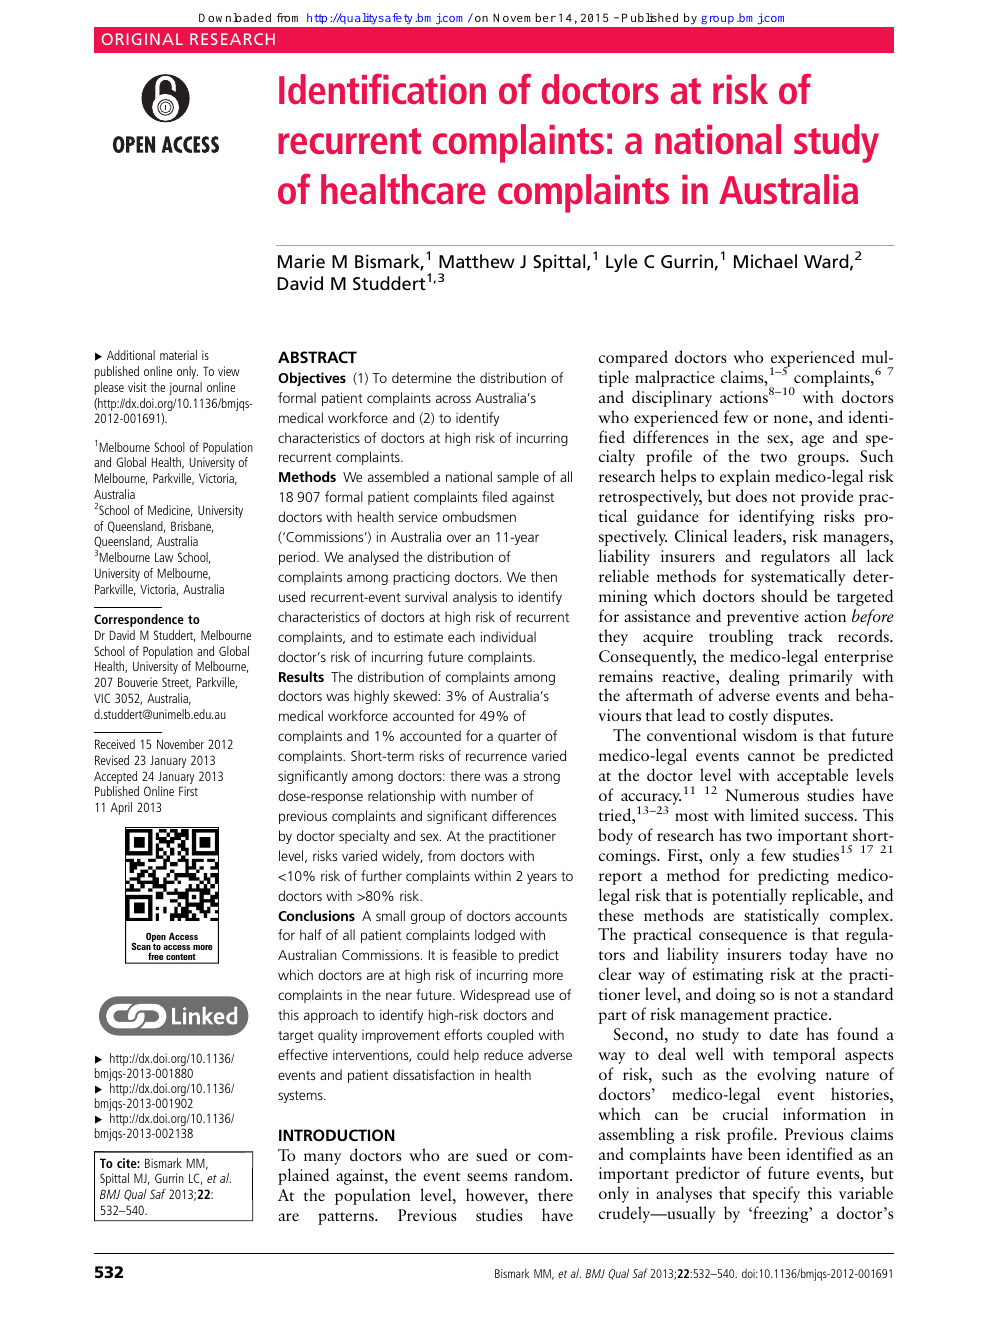 Identification Of Doctors At Risk Of Recurrent Complaints A National Study Of Healthcare Complaints In Australia Topic Of Research Paper In Clinical Medicine Download Scholarly Article Pdf And Read For Free